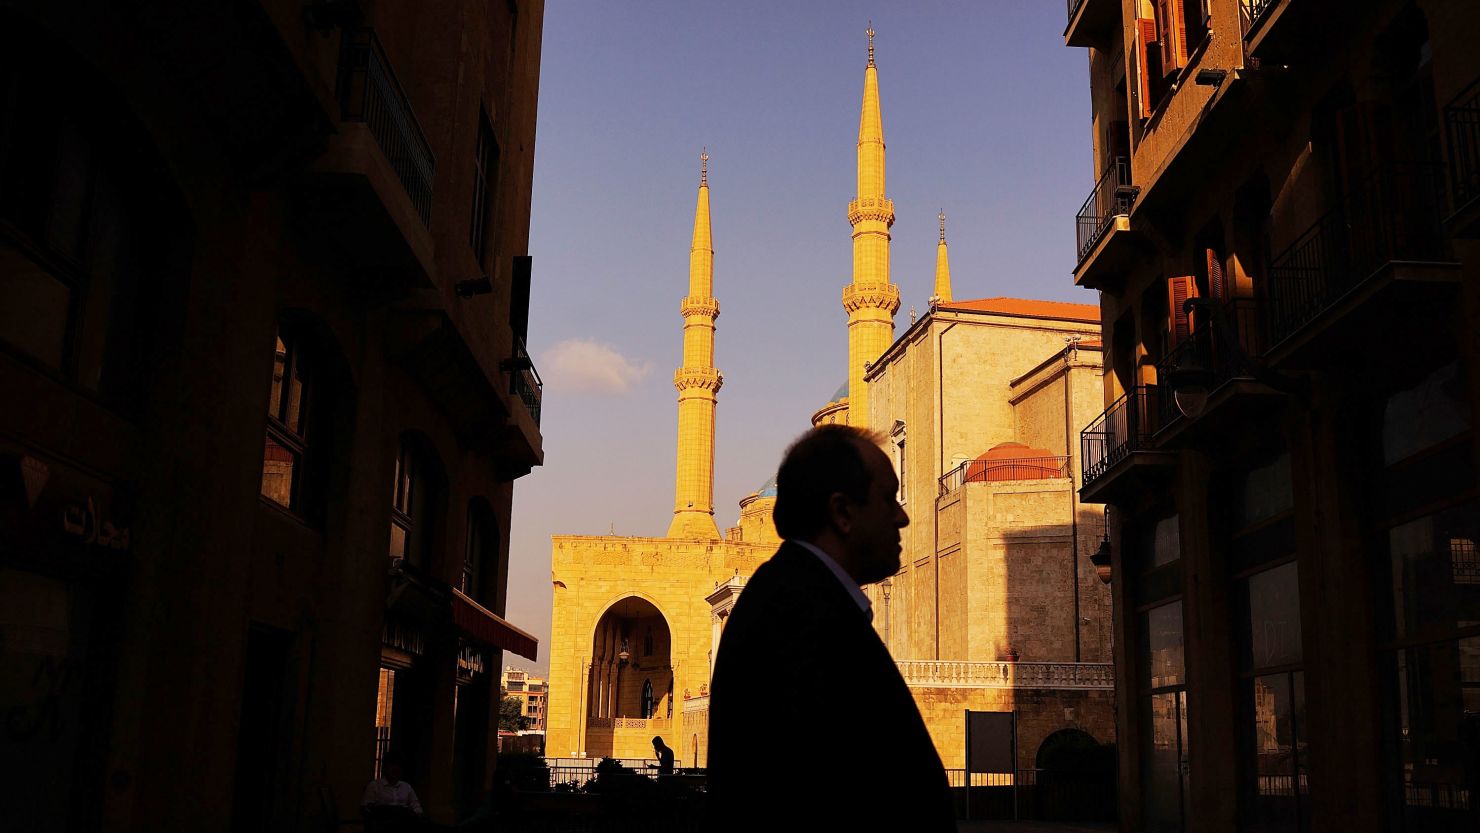 Security concerns and higher prices have made Ramadan hard for many in Beirut this year.